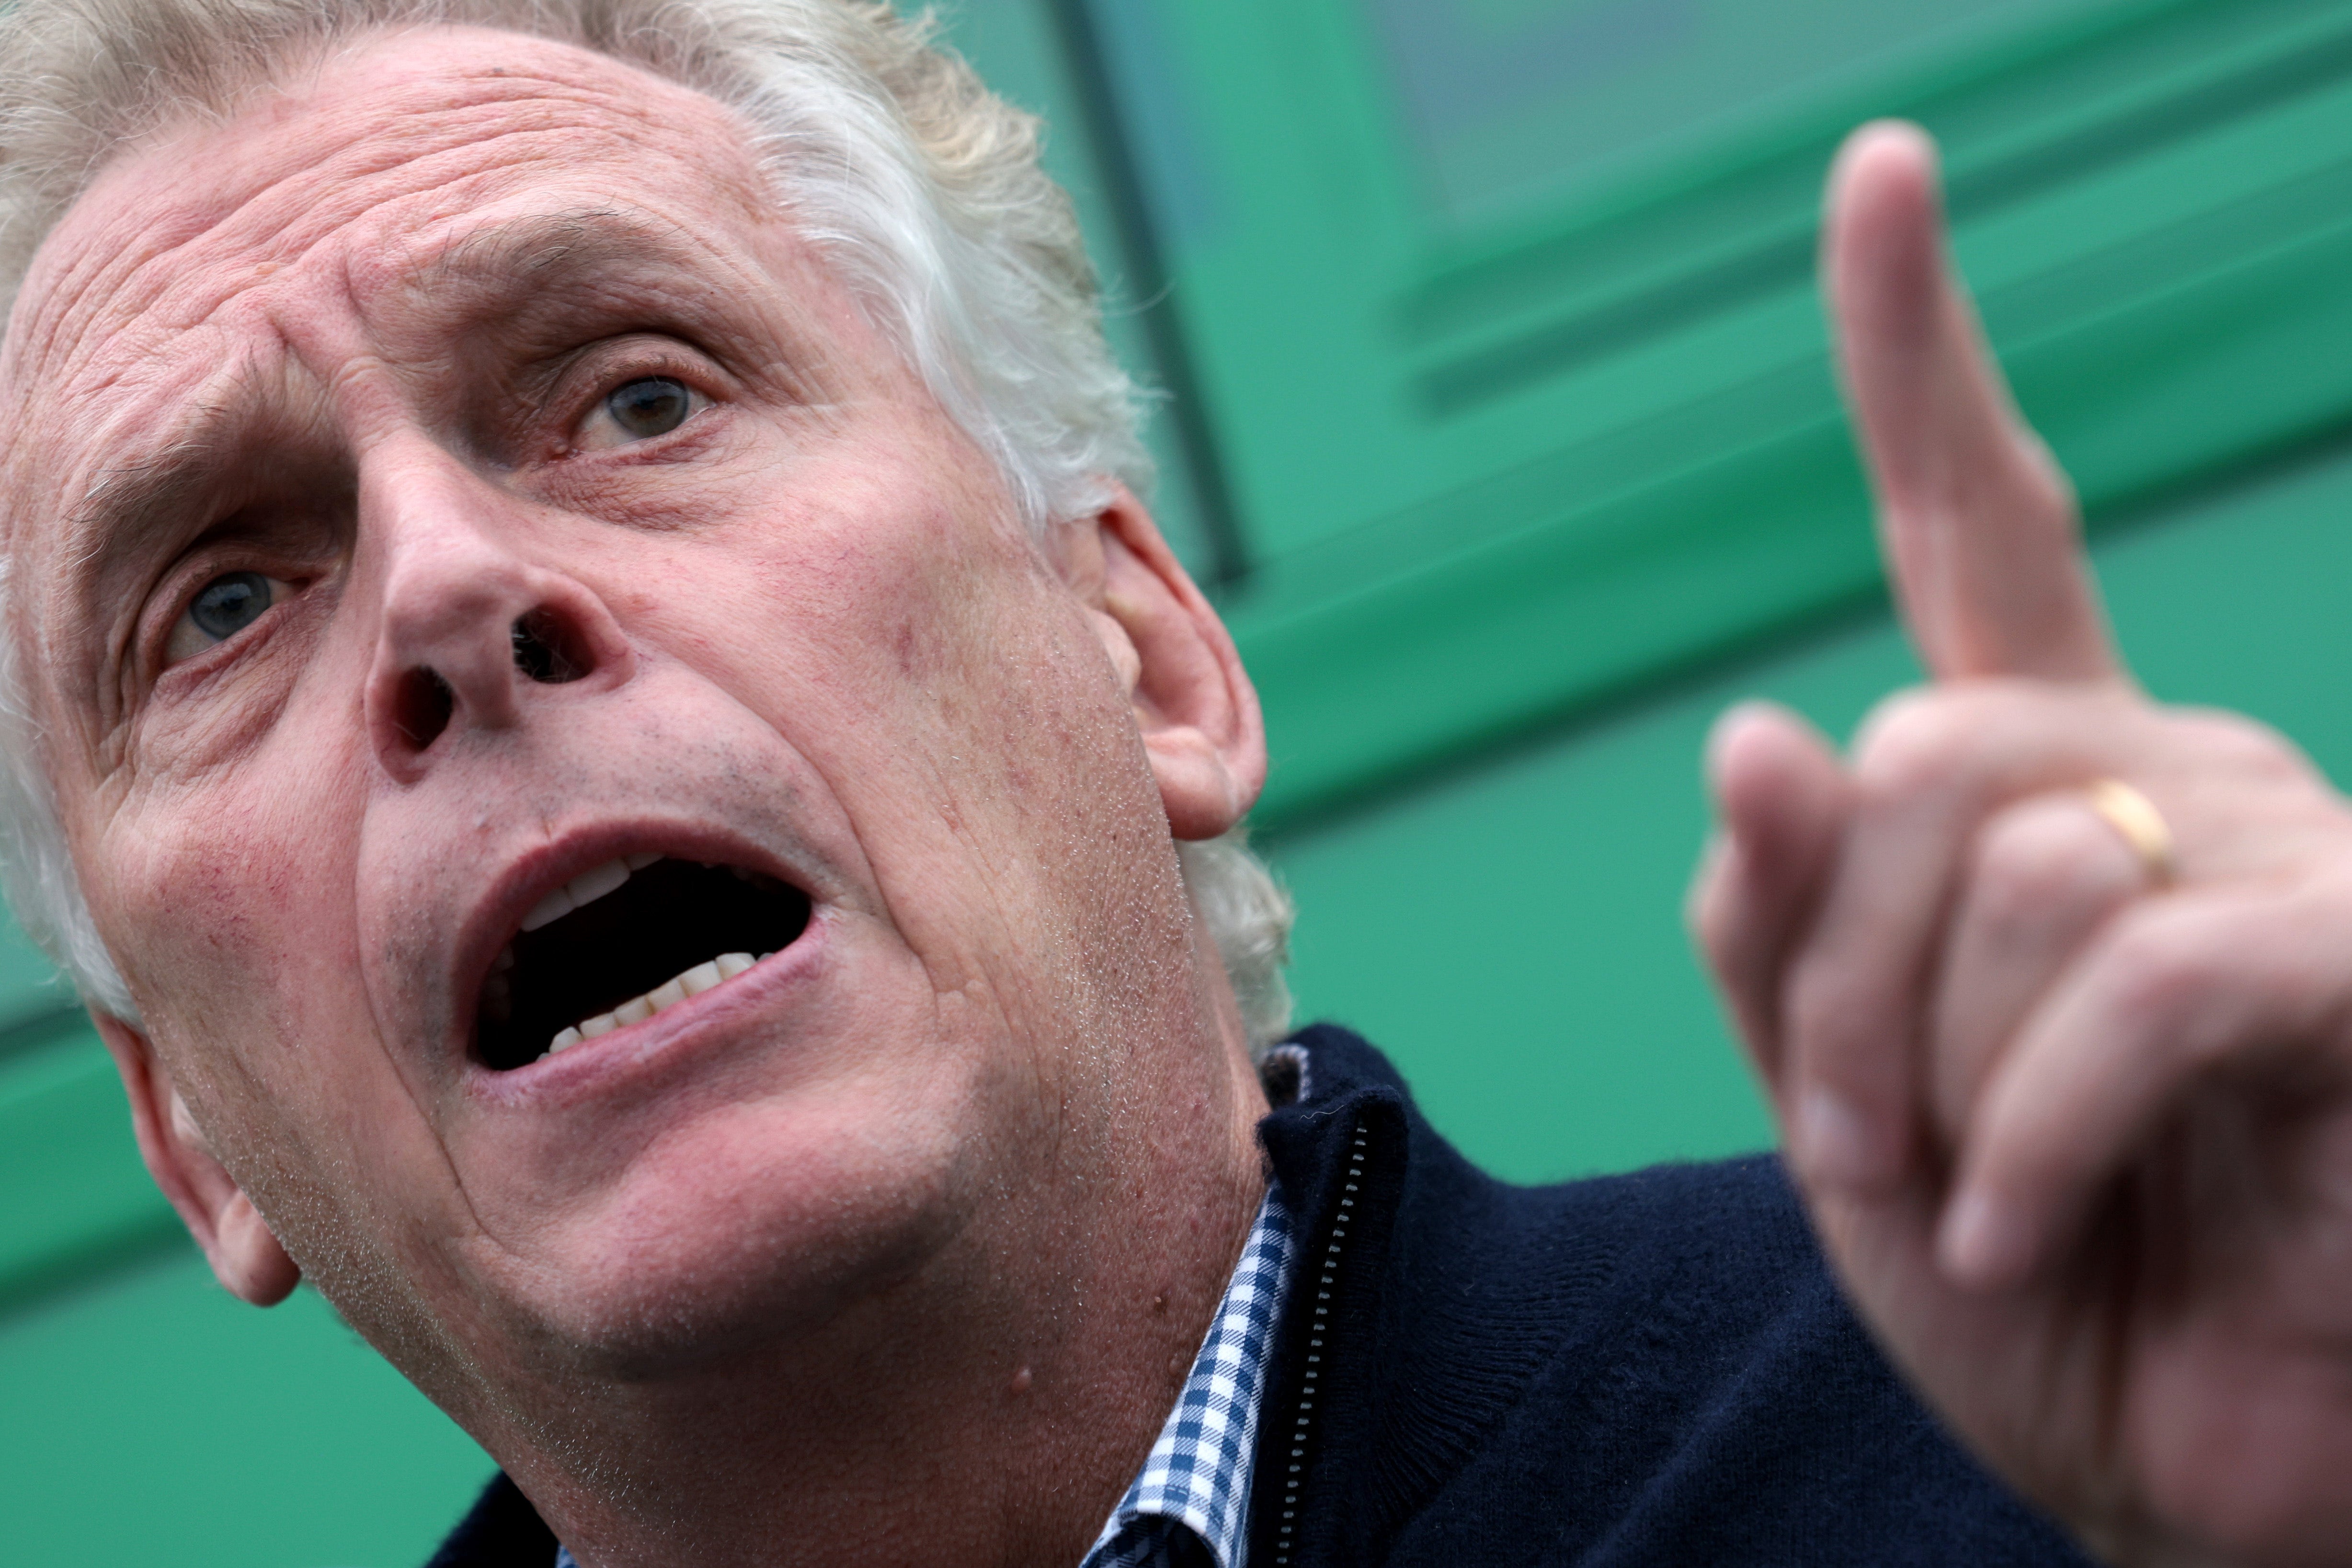 McAuliffe spokesperson, who also worked for Harris and Biden campaigns, accused of racist tweets